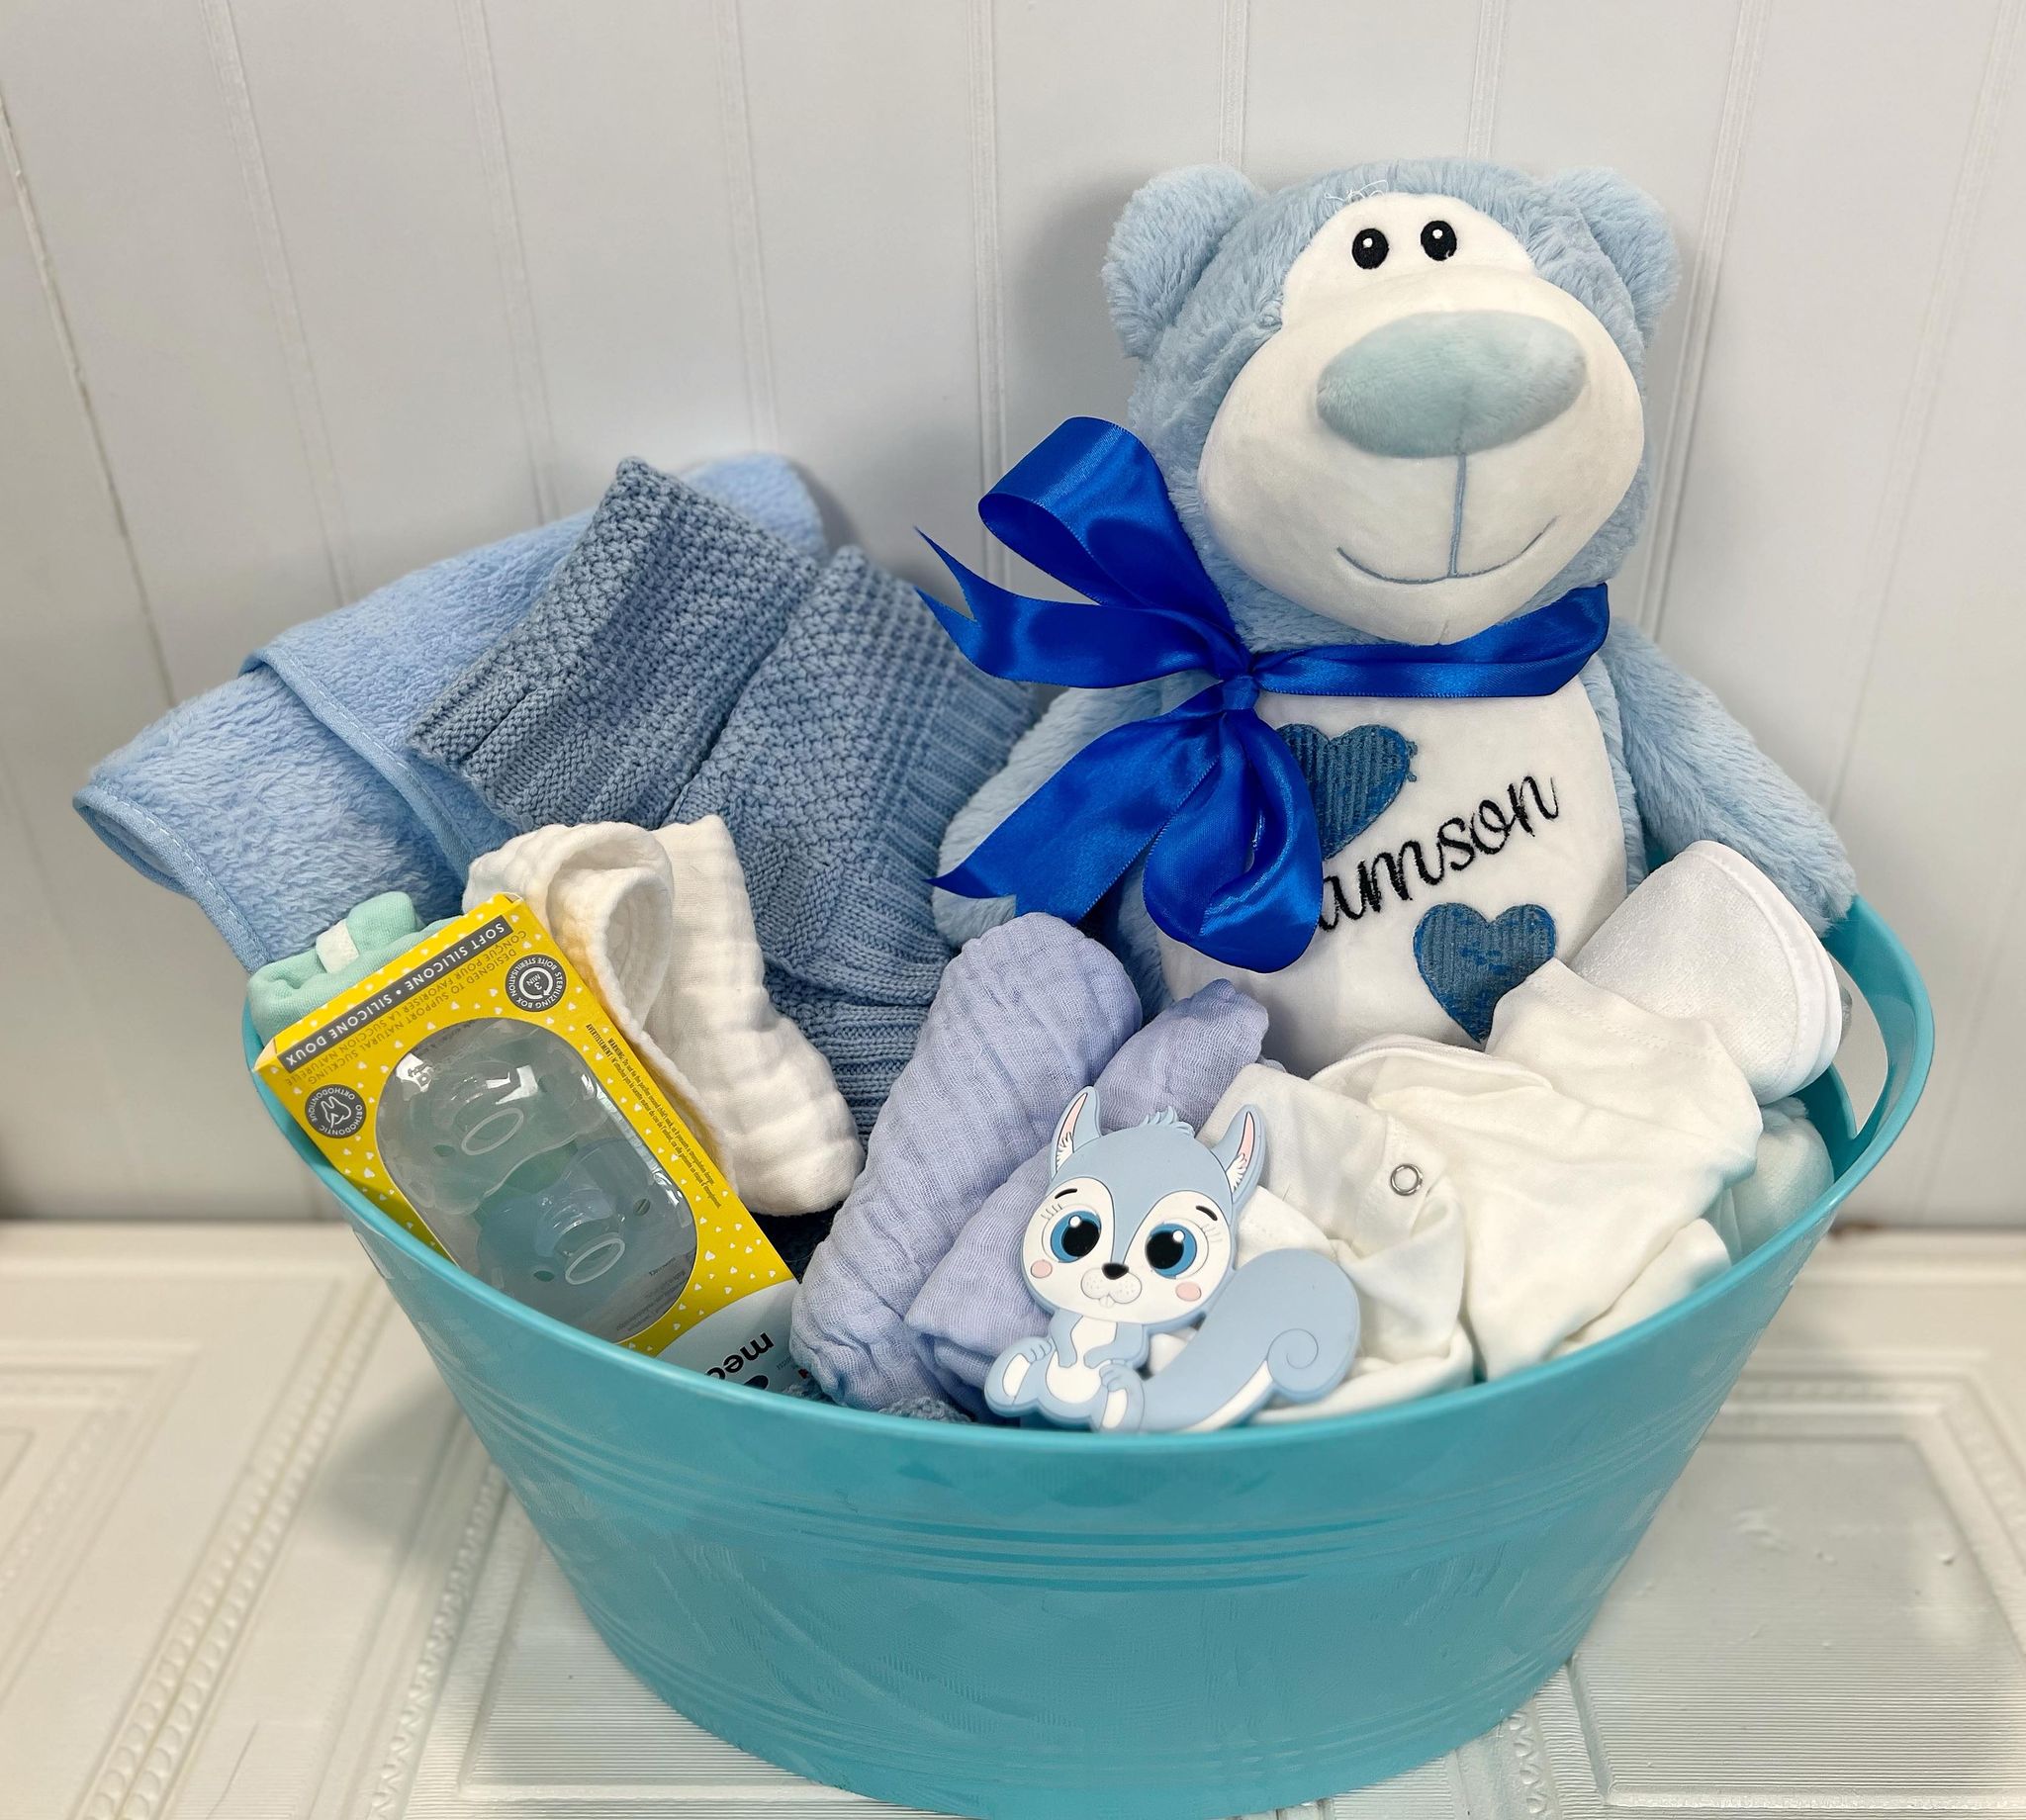 Edmonton Personalized Baby Gifts